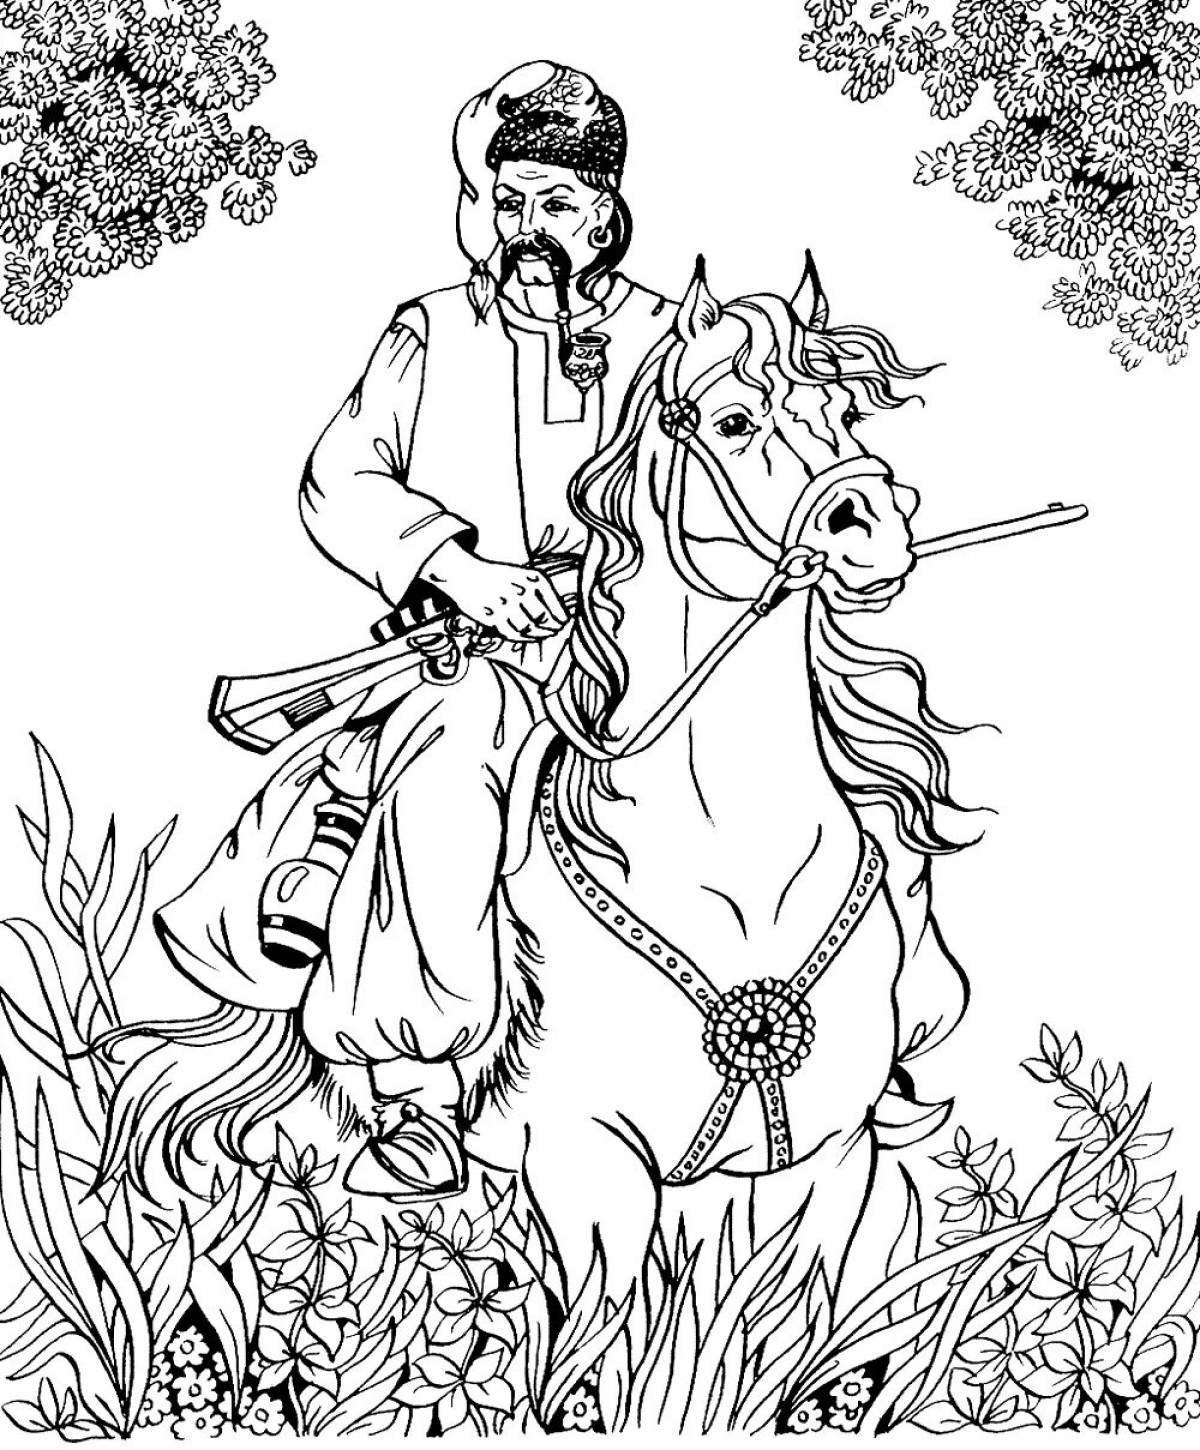 Funny Cossack coloring pages for beginners